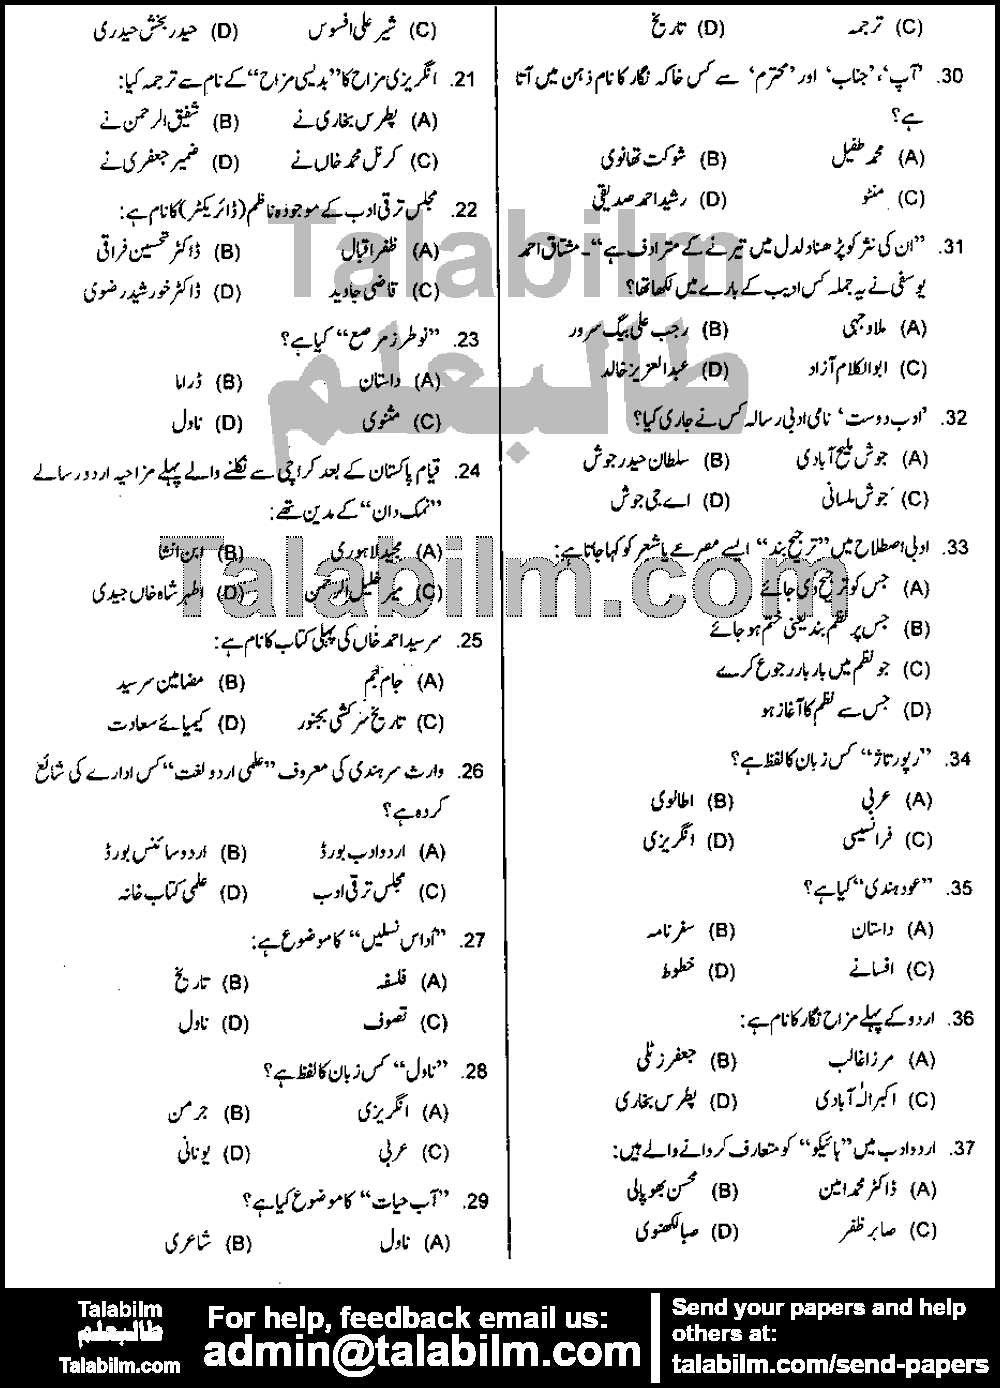 Urdu Elementary School Educator 0 past paper for 2019 Page No. 2